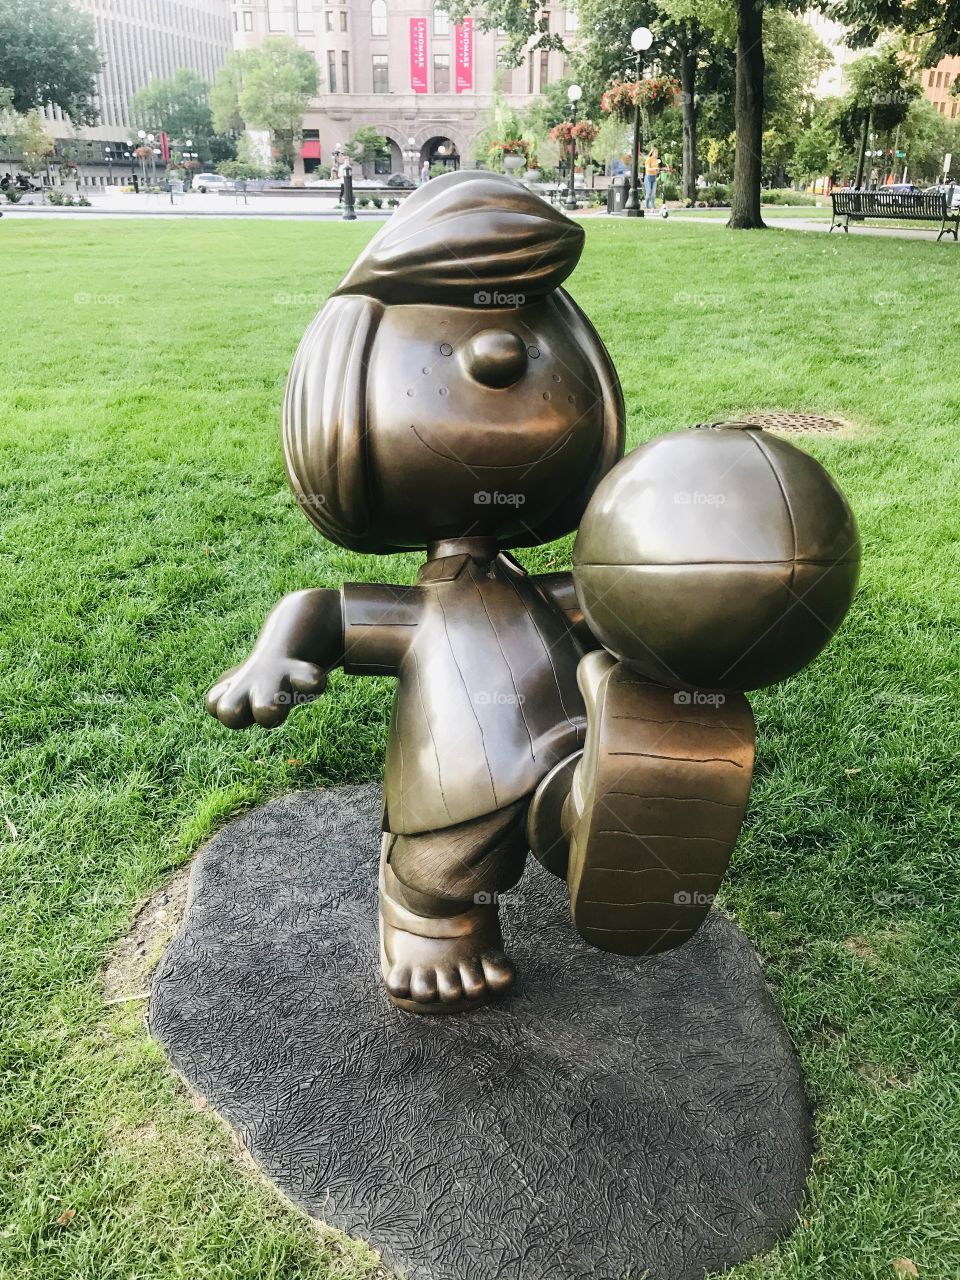 Super fun Charlie Brown and crew bronze characters in park on beautifully sunny day!! 